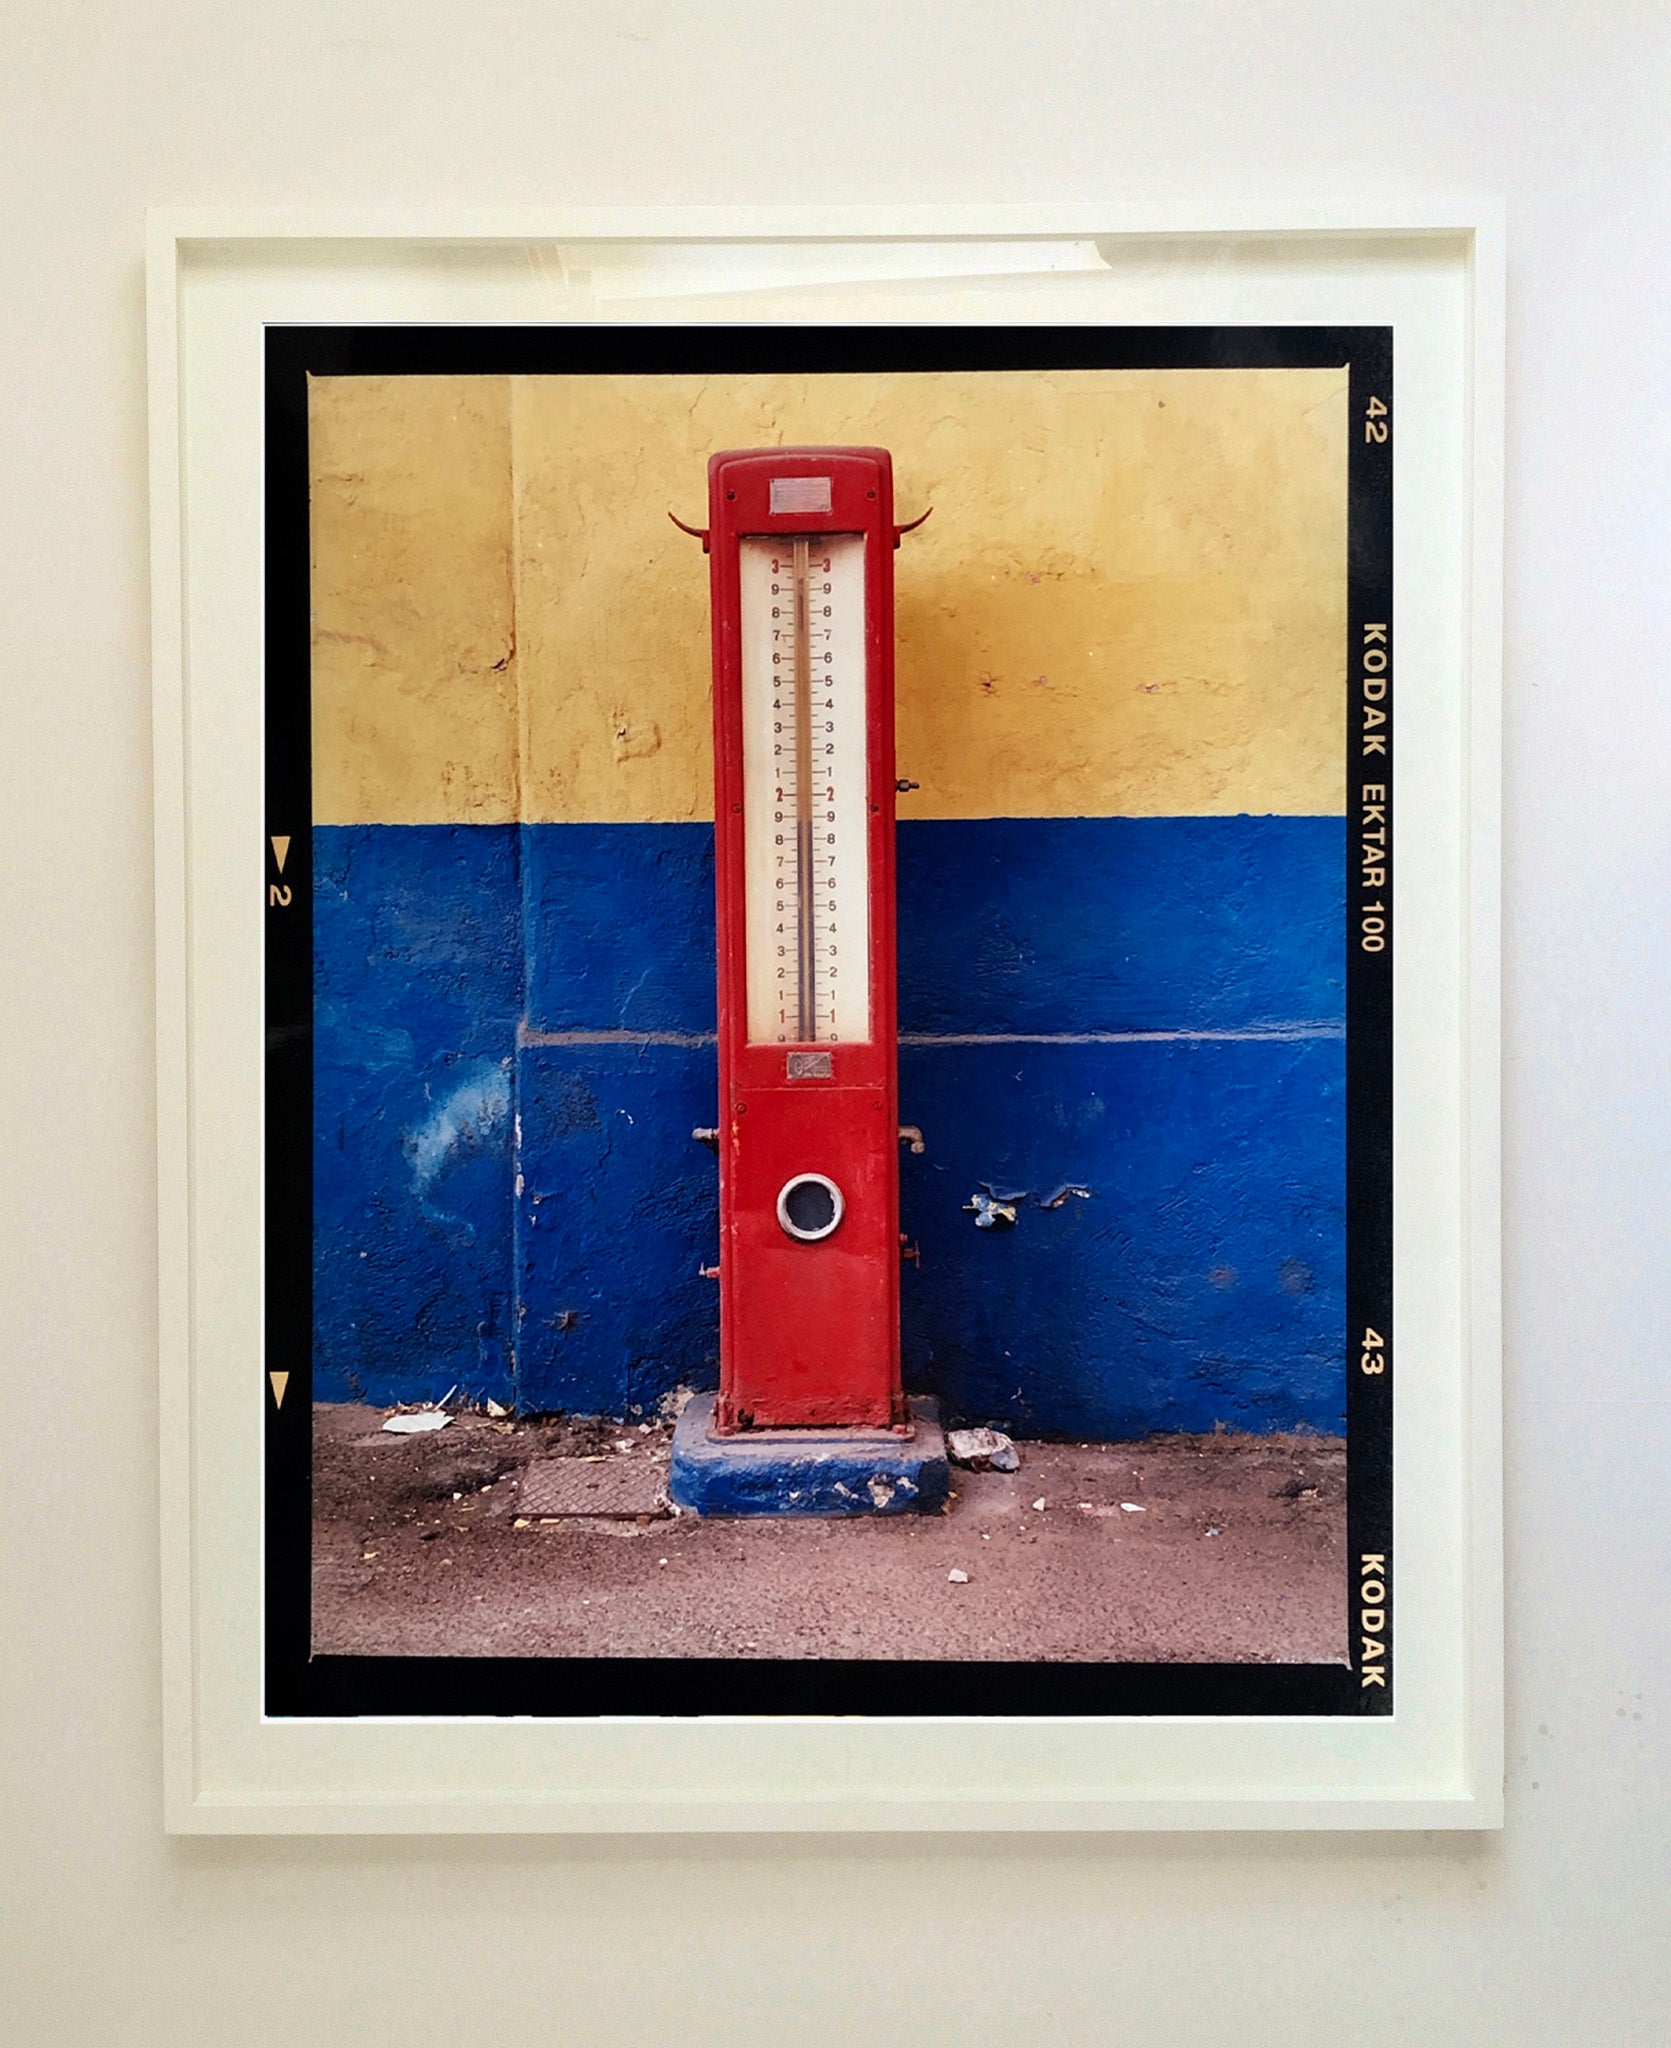 A red retro tyre pump against a yellow and blue painted wall, in the Porta Genova area of Milan.